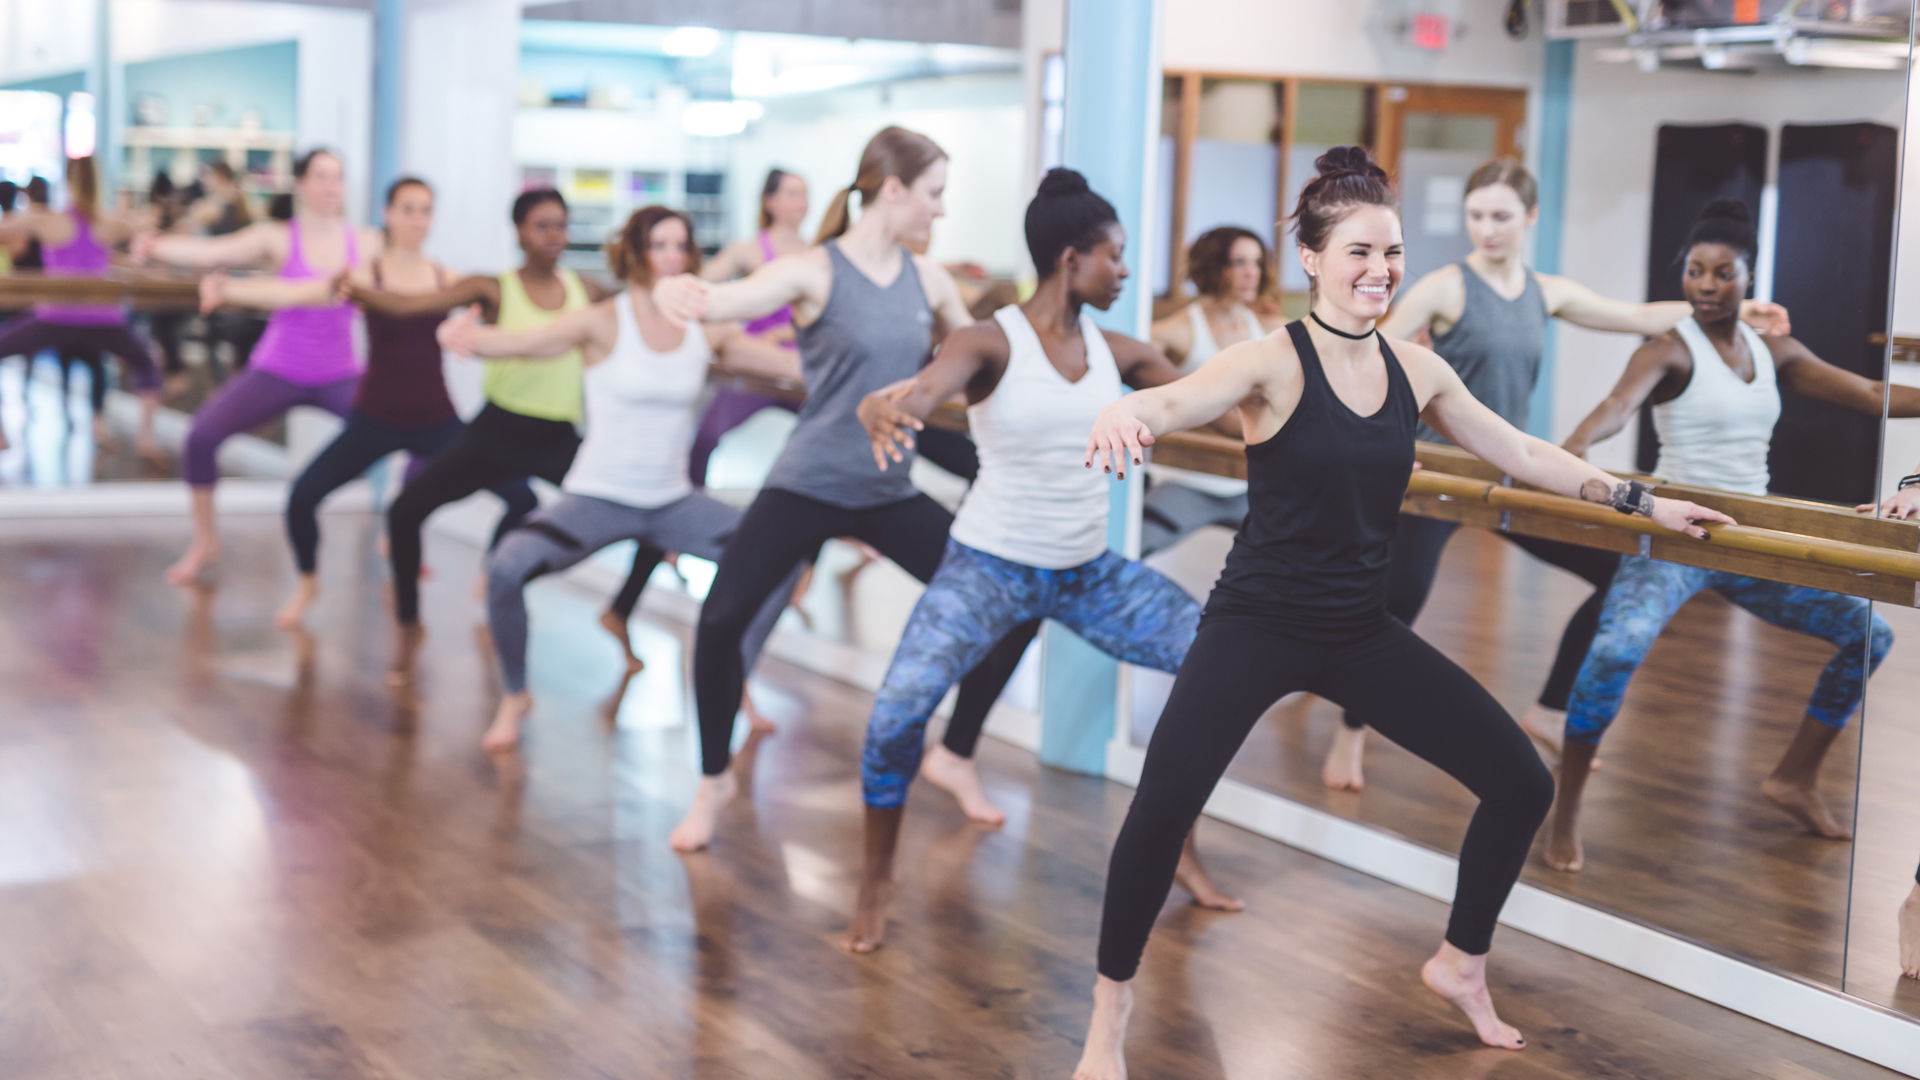 Everything you need to know about SoulBody Barre